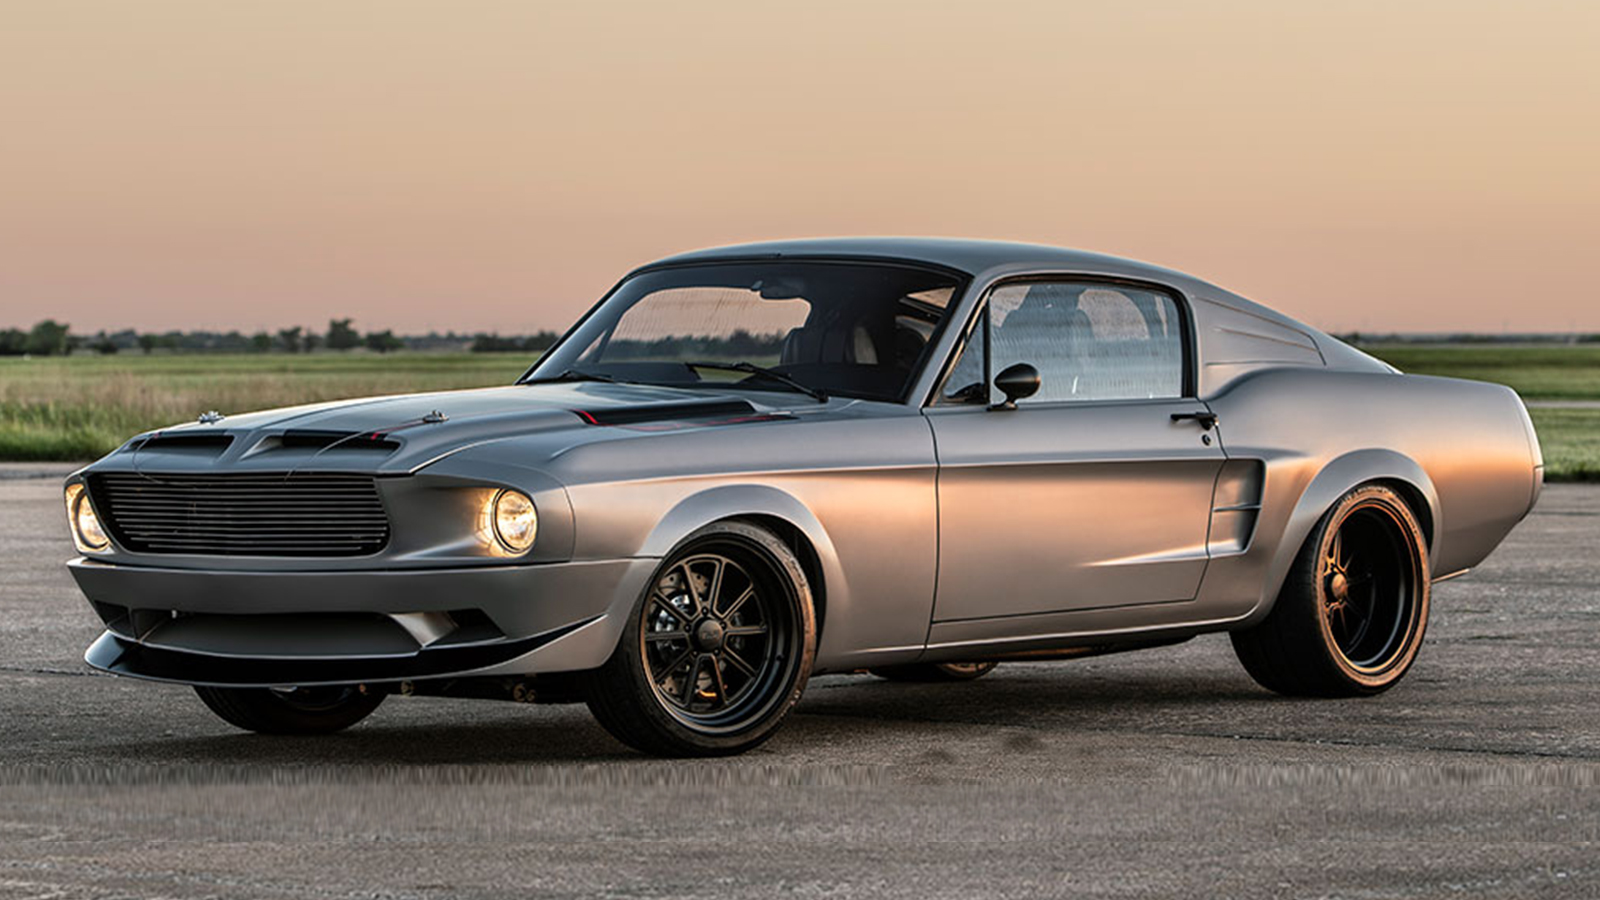 Turn Heads In This Villain Mustang From Classic Recreations - IMBOLDN